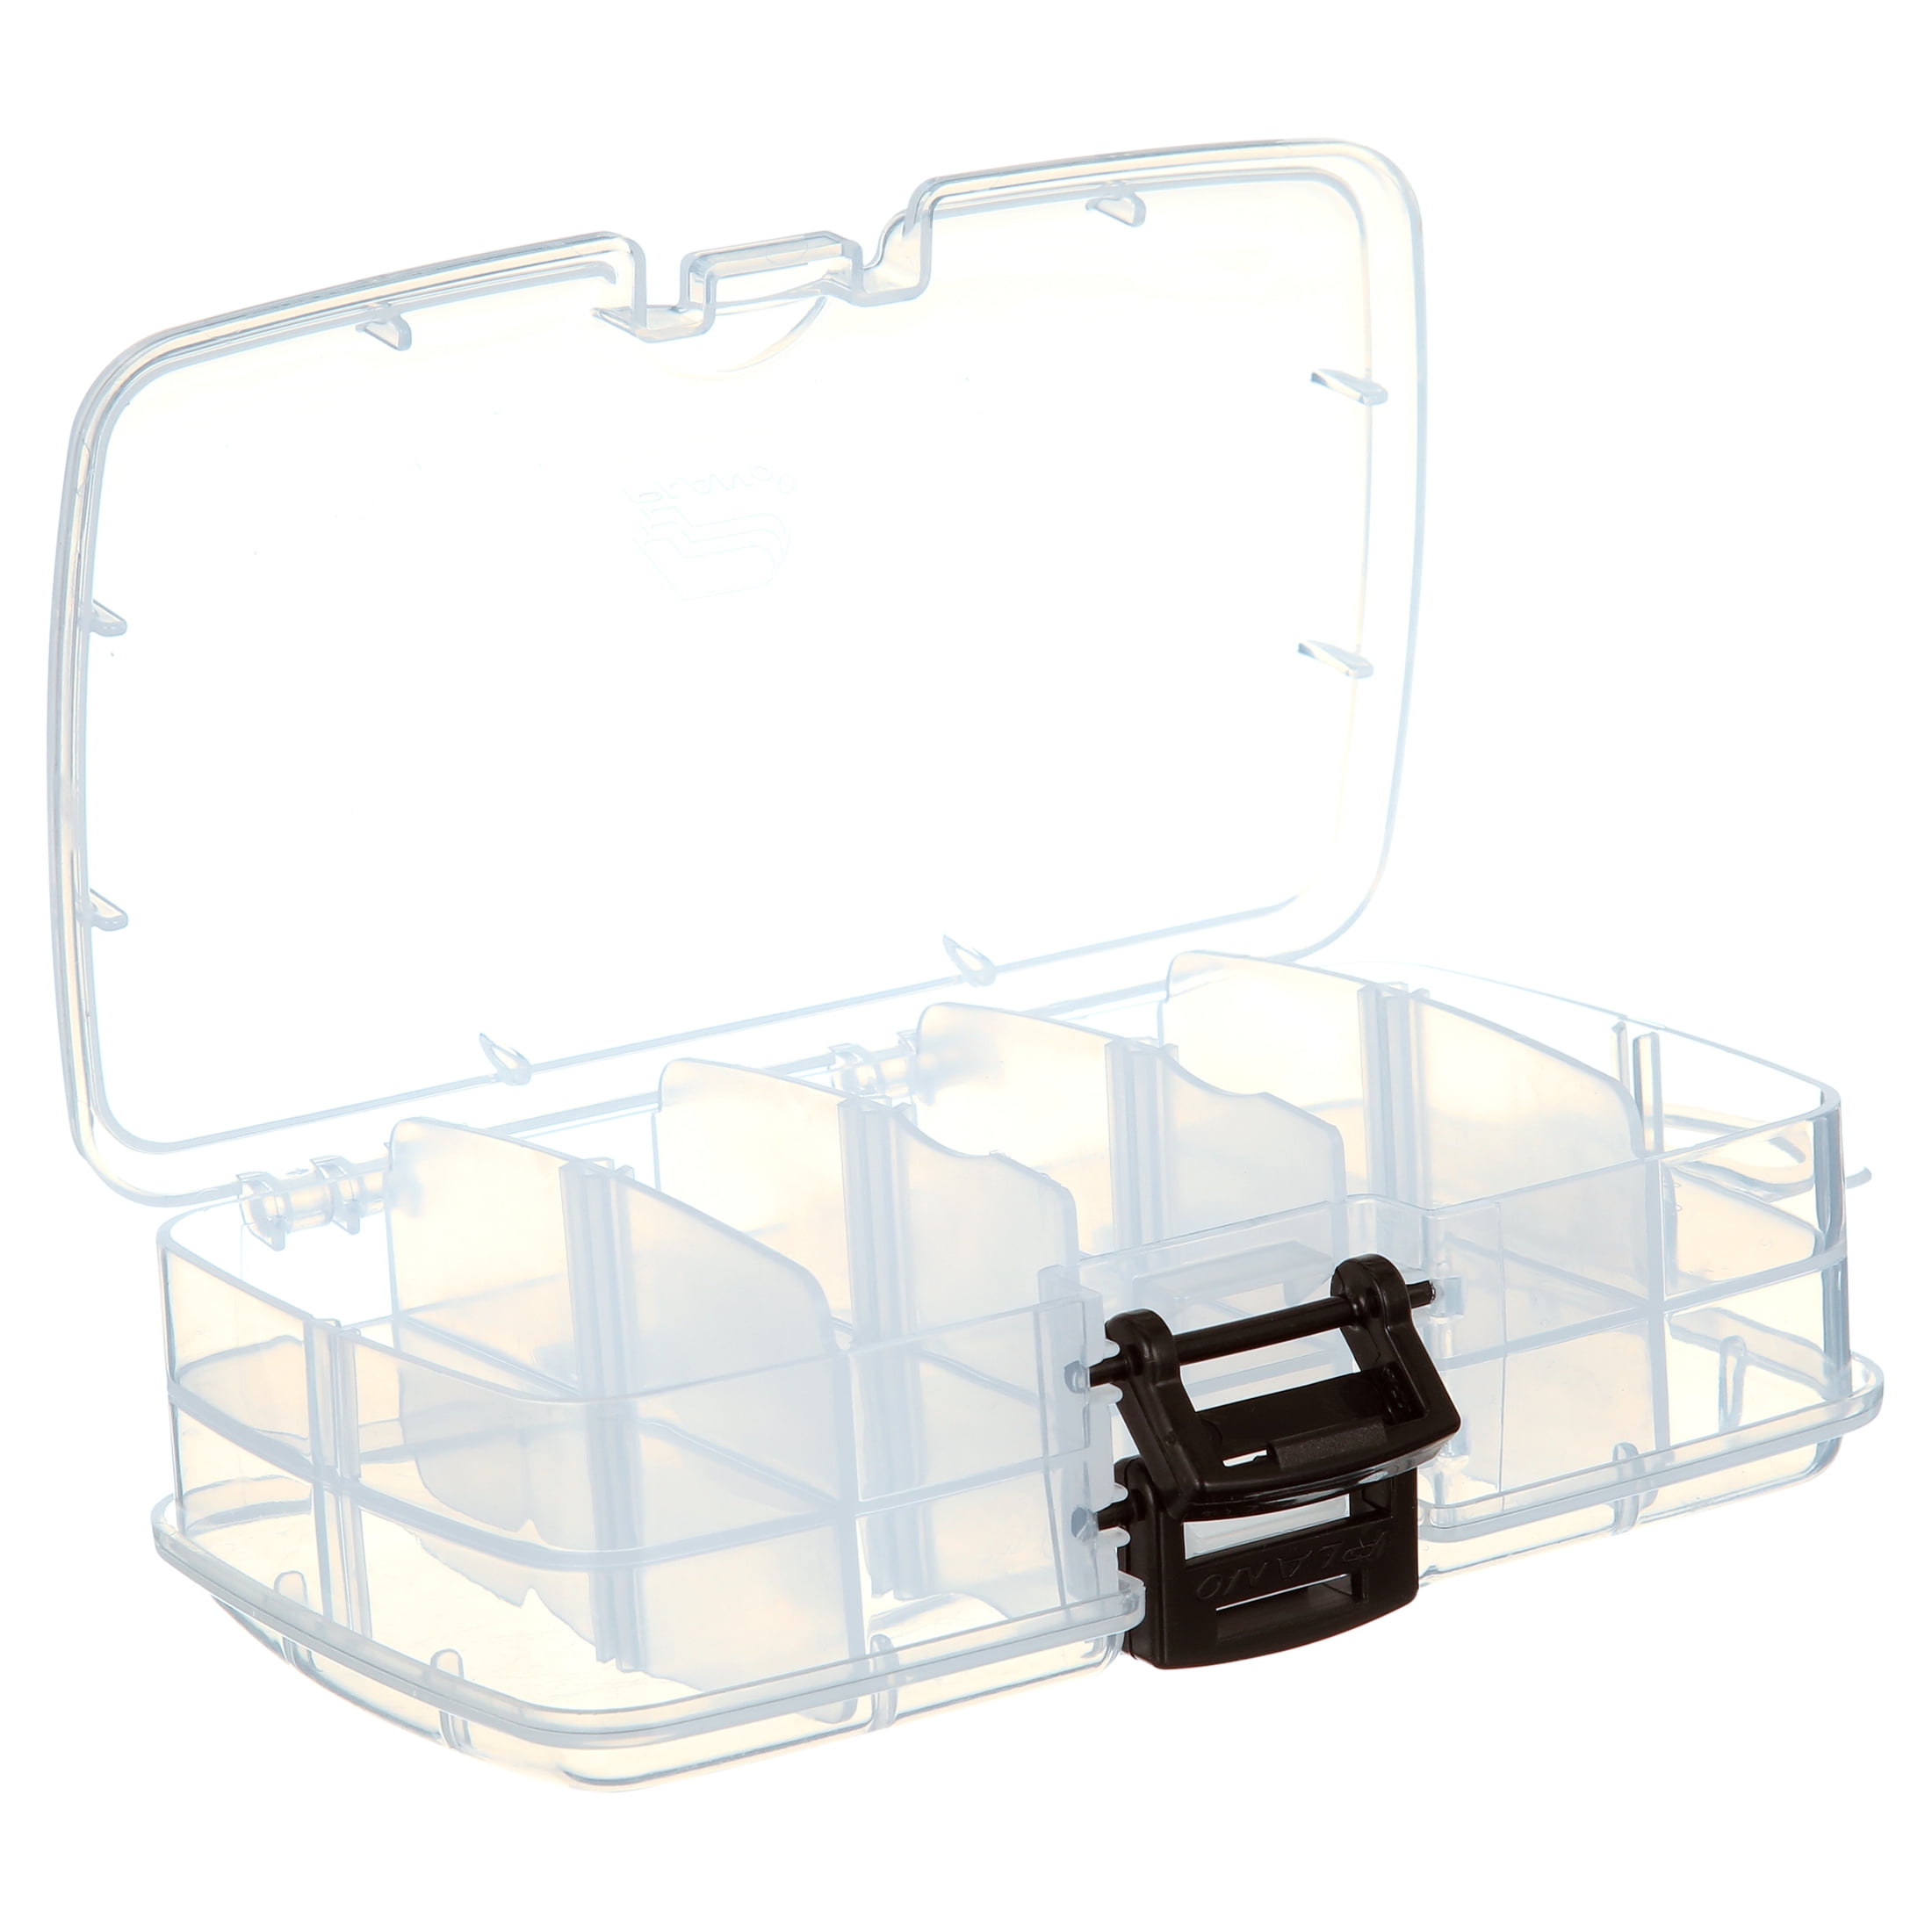 Plano Double-Sided Adjustable Tackle Organizer Large - Silver/Blue 海外 即決 -  スキル、知識